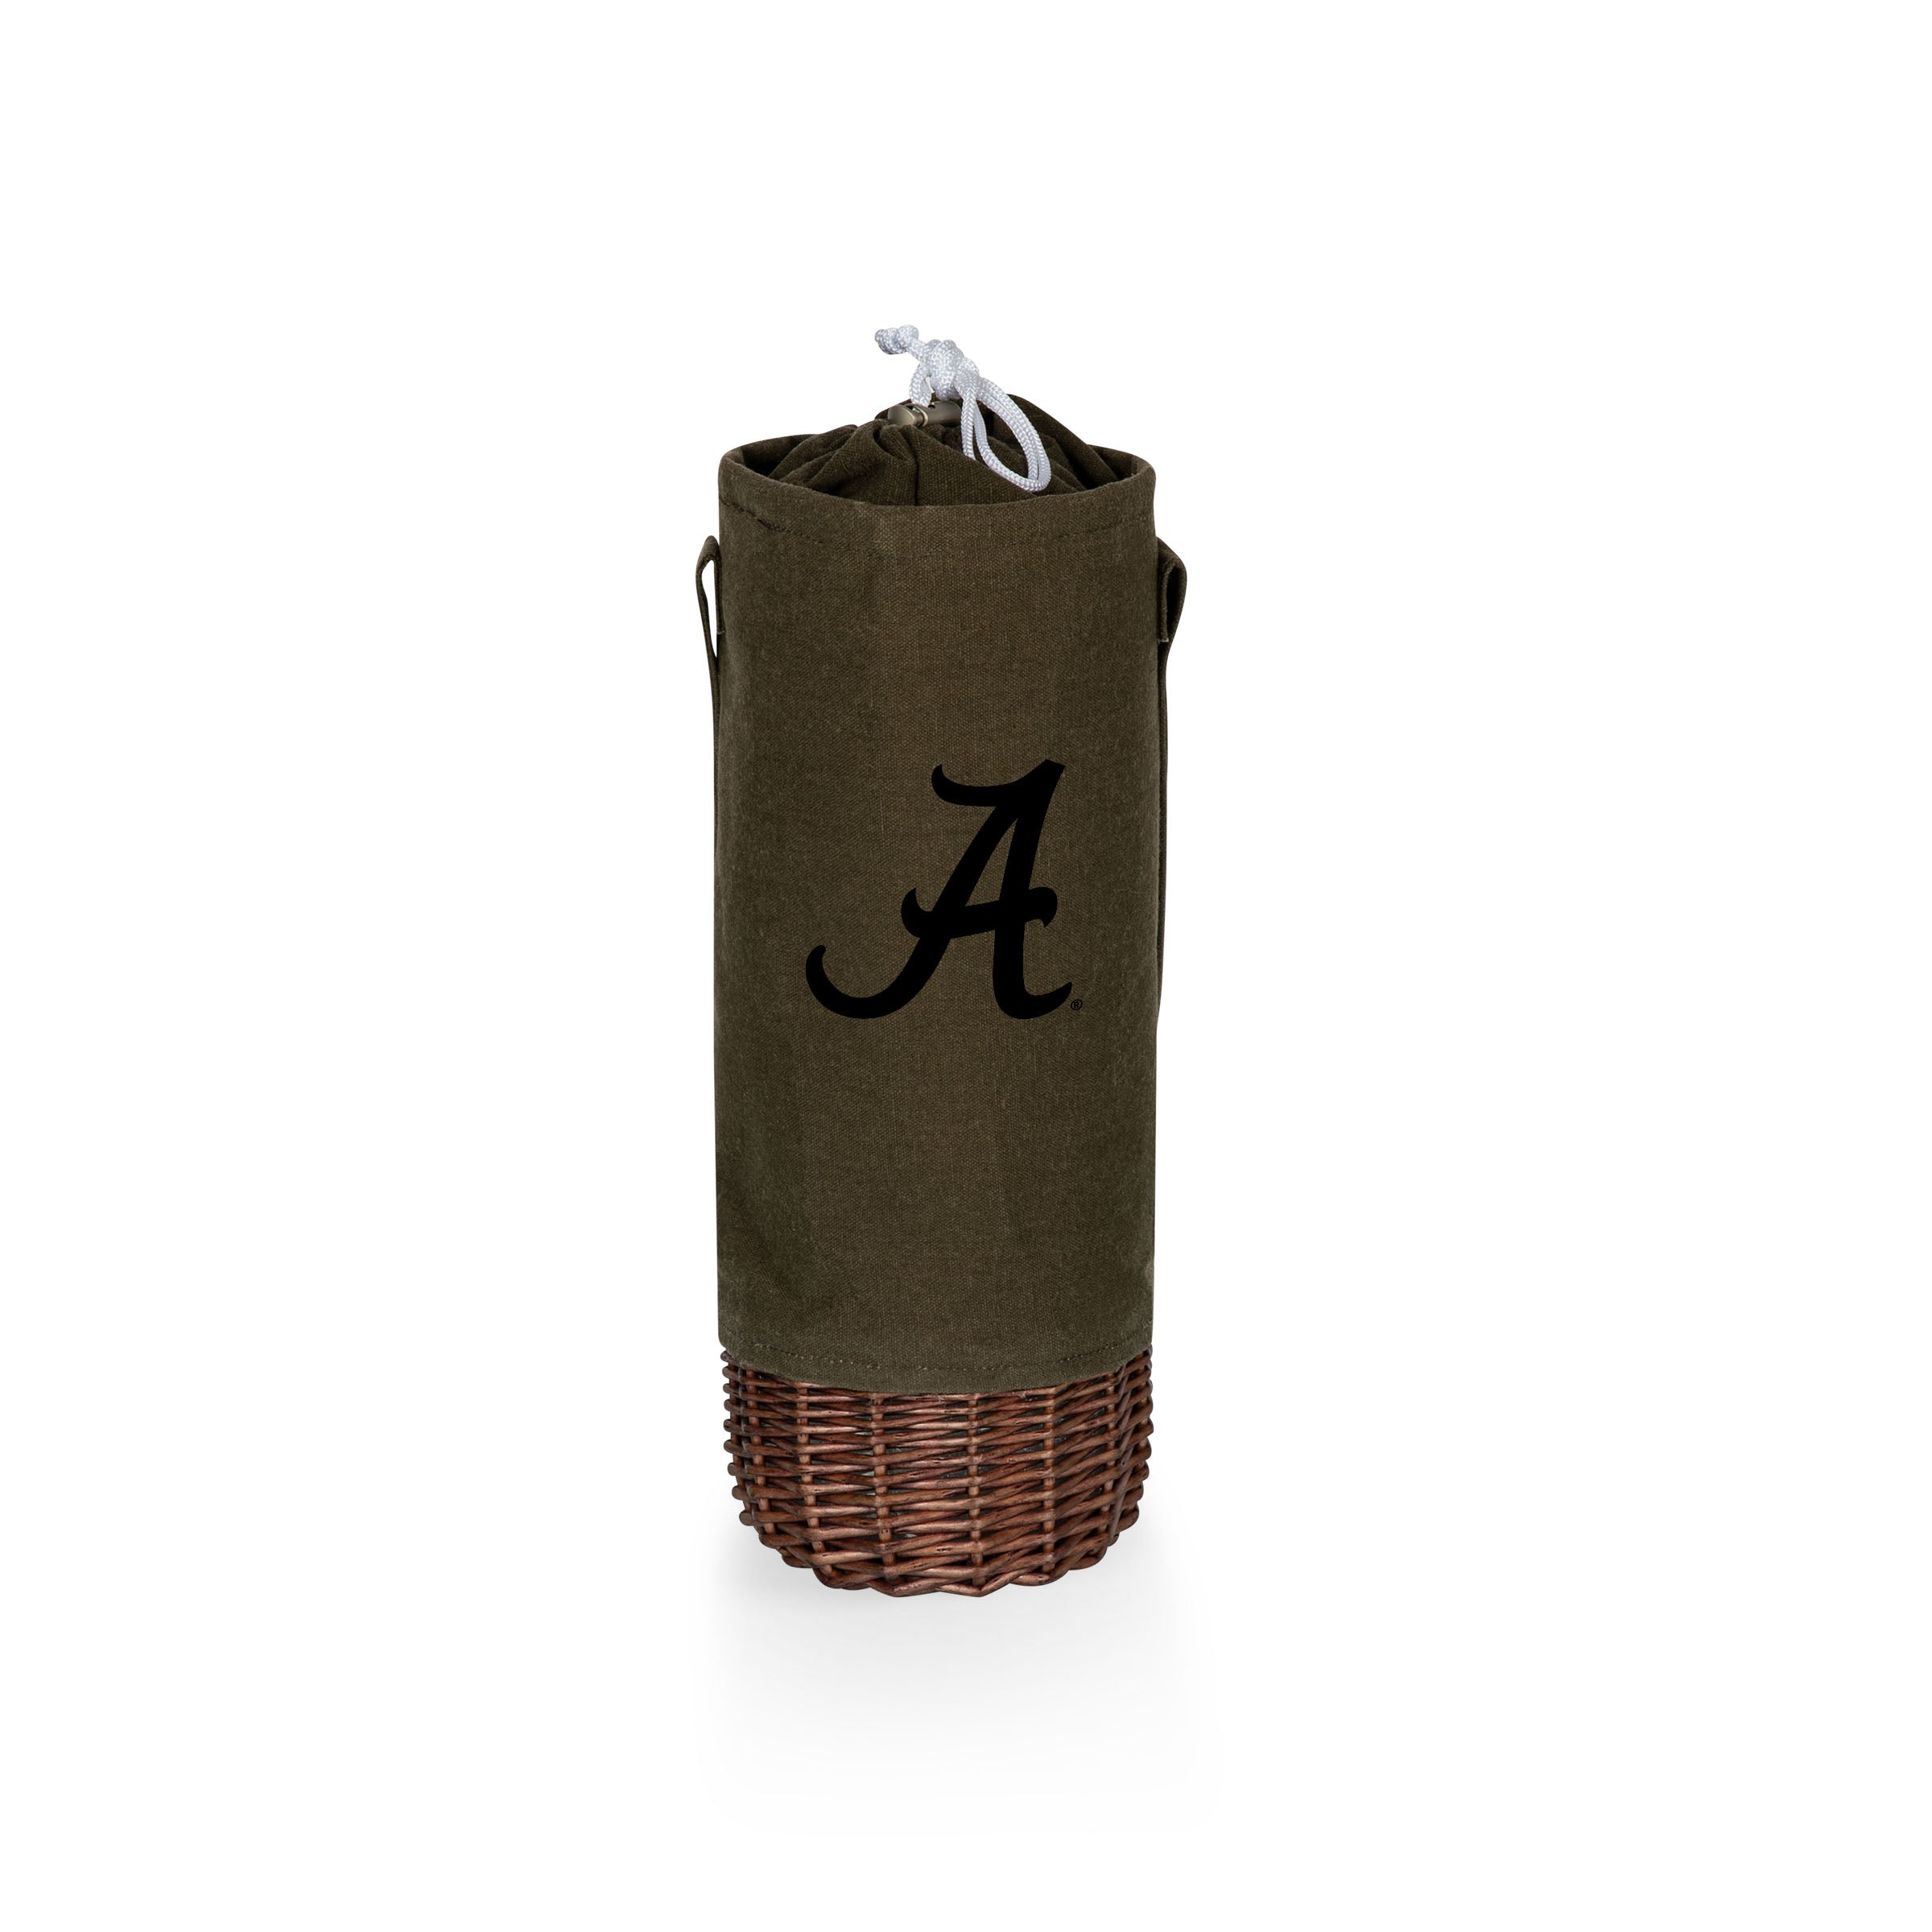 Alabama Crimson Tide - Malbec Insulated Canvas and Willow Wine Bottle Basket